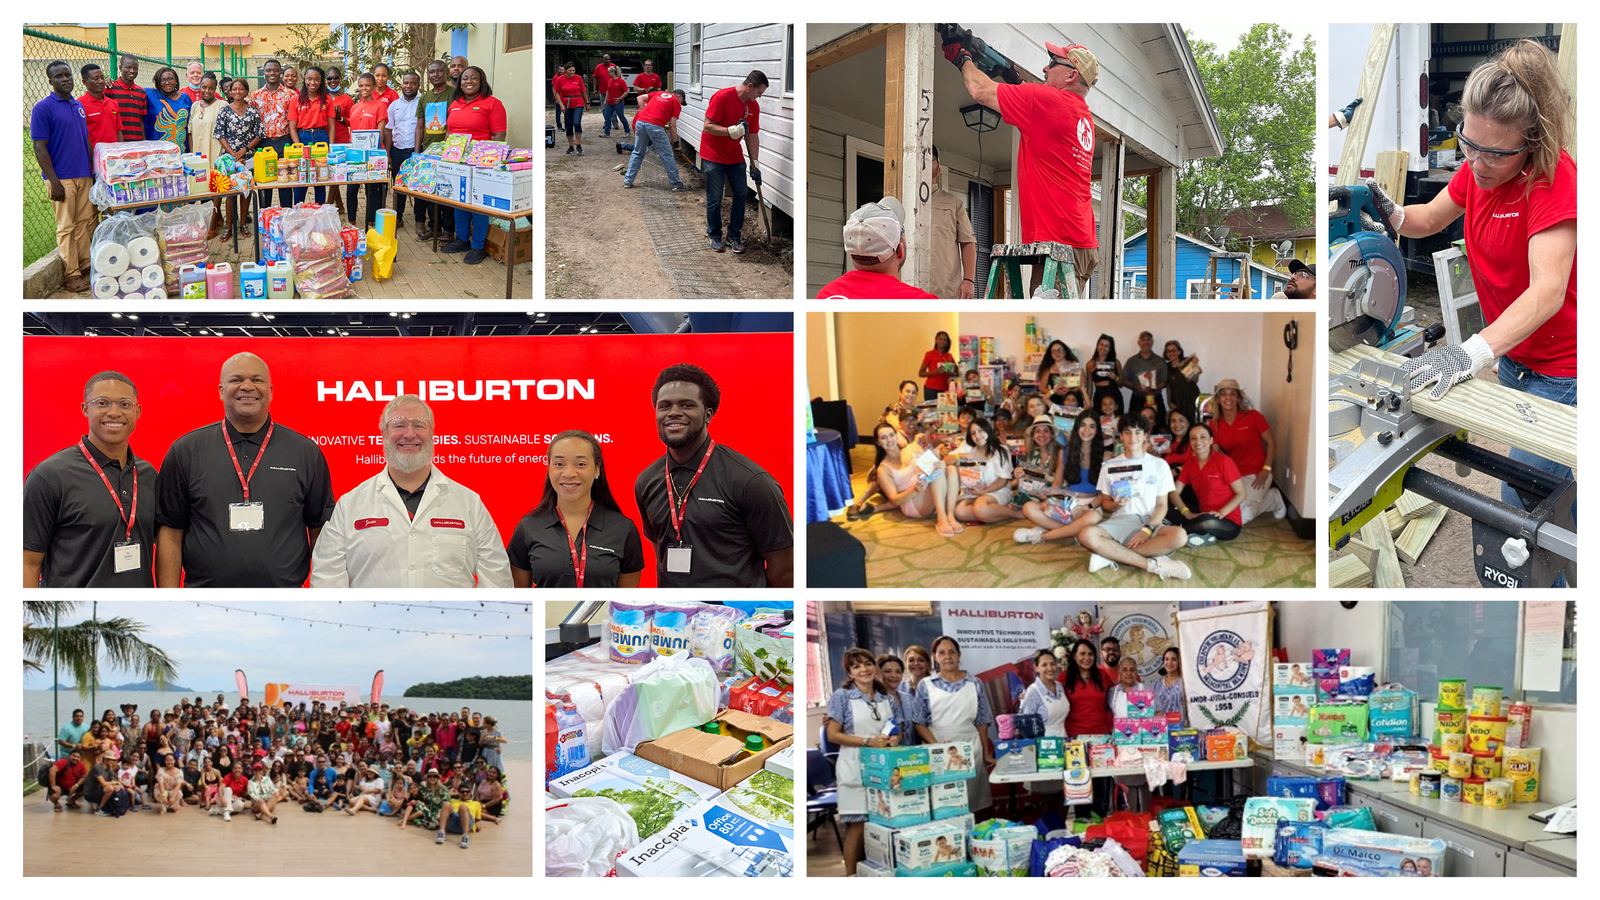 Halliburton employees organize and participate in charity events around the world.